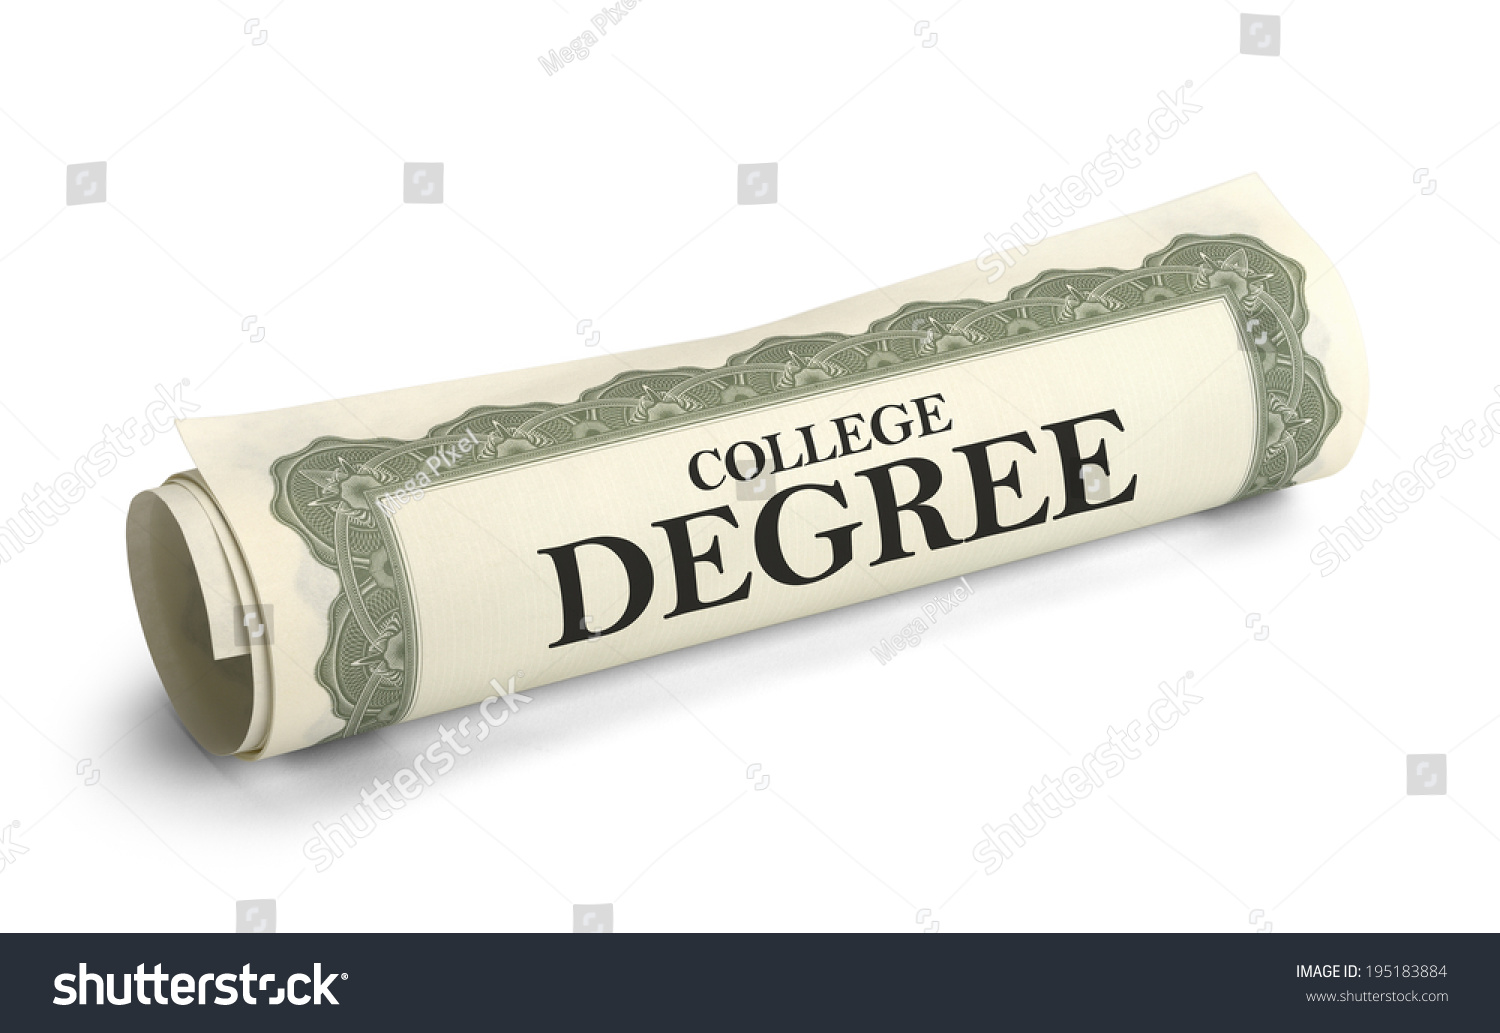 Image result for college diploma